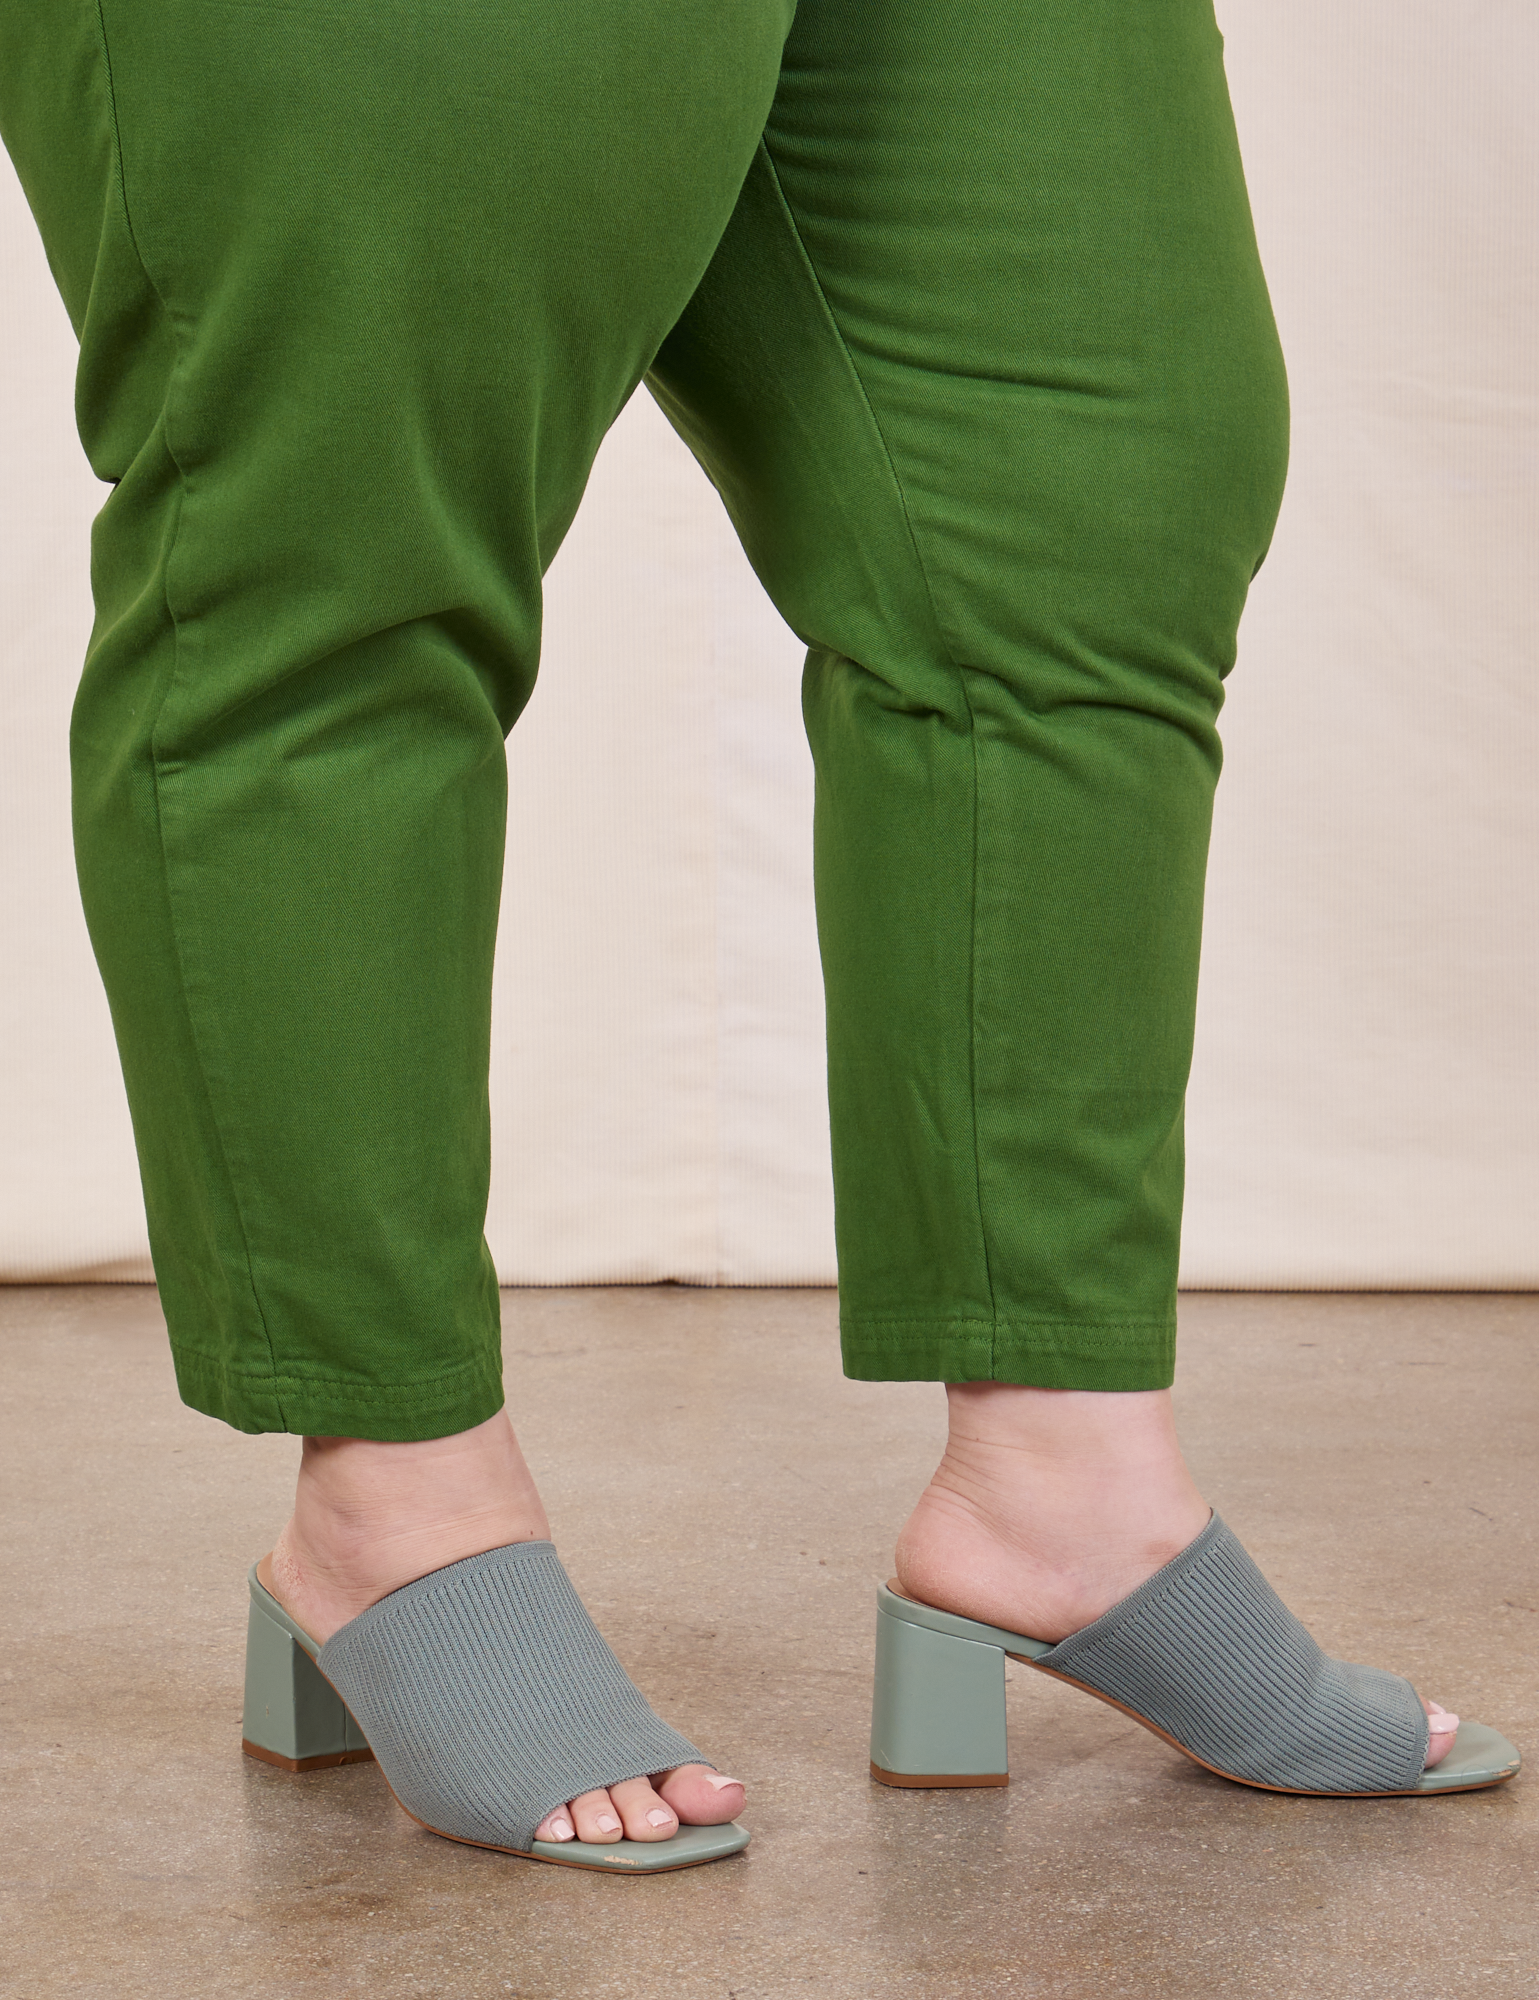 Petite Pencil Pants in Lawn Green pant leg side view close up on Ashley